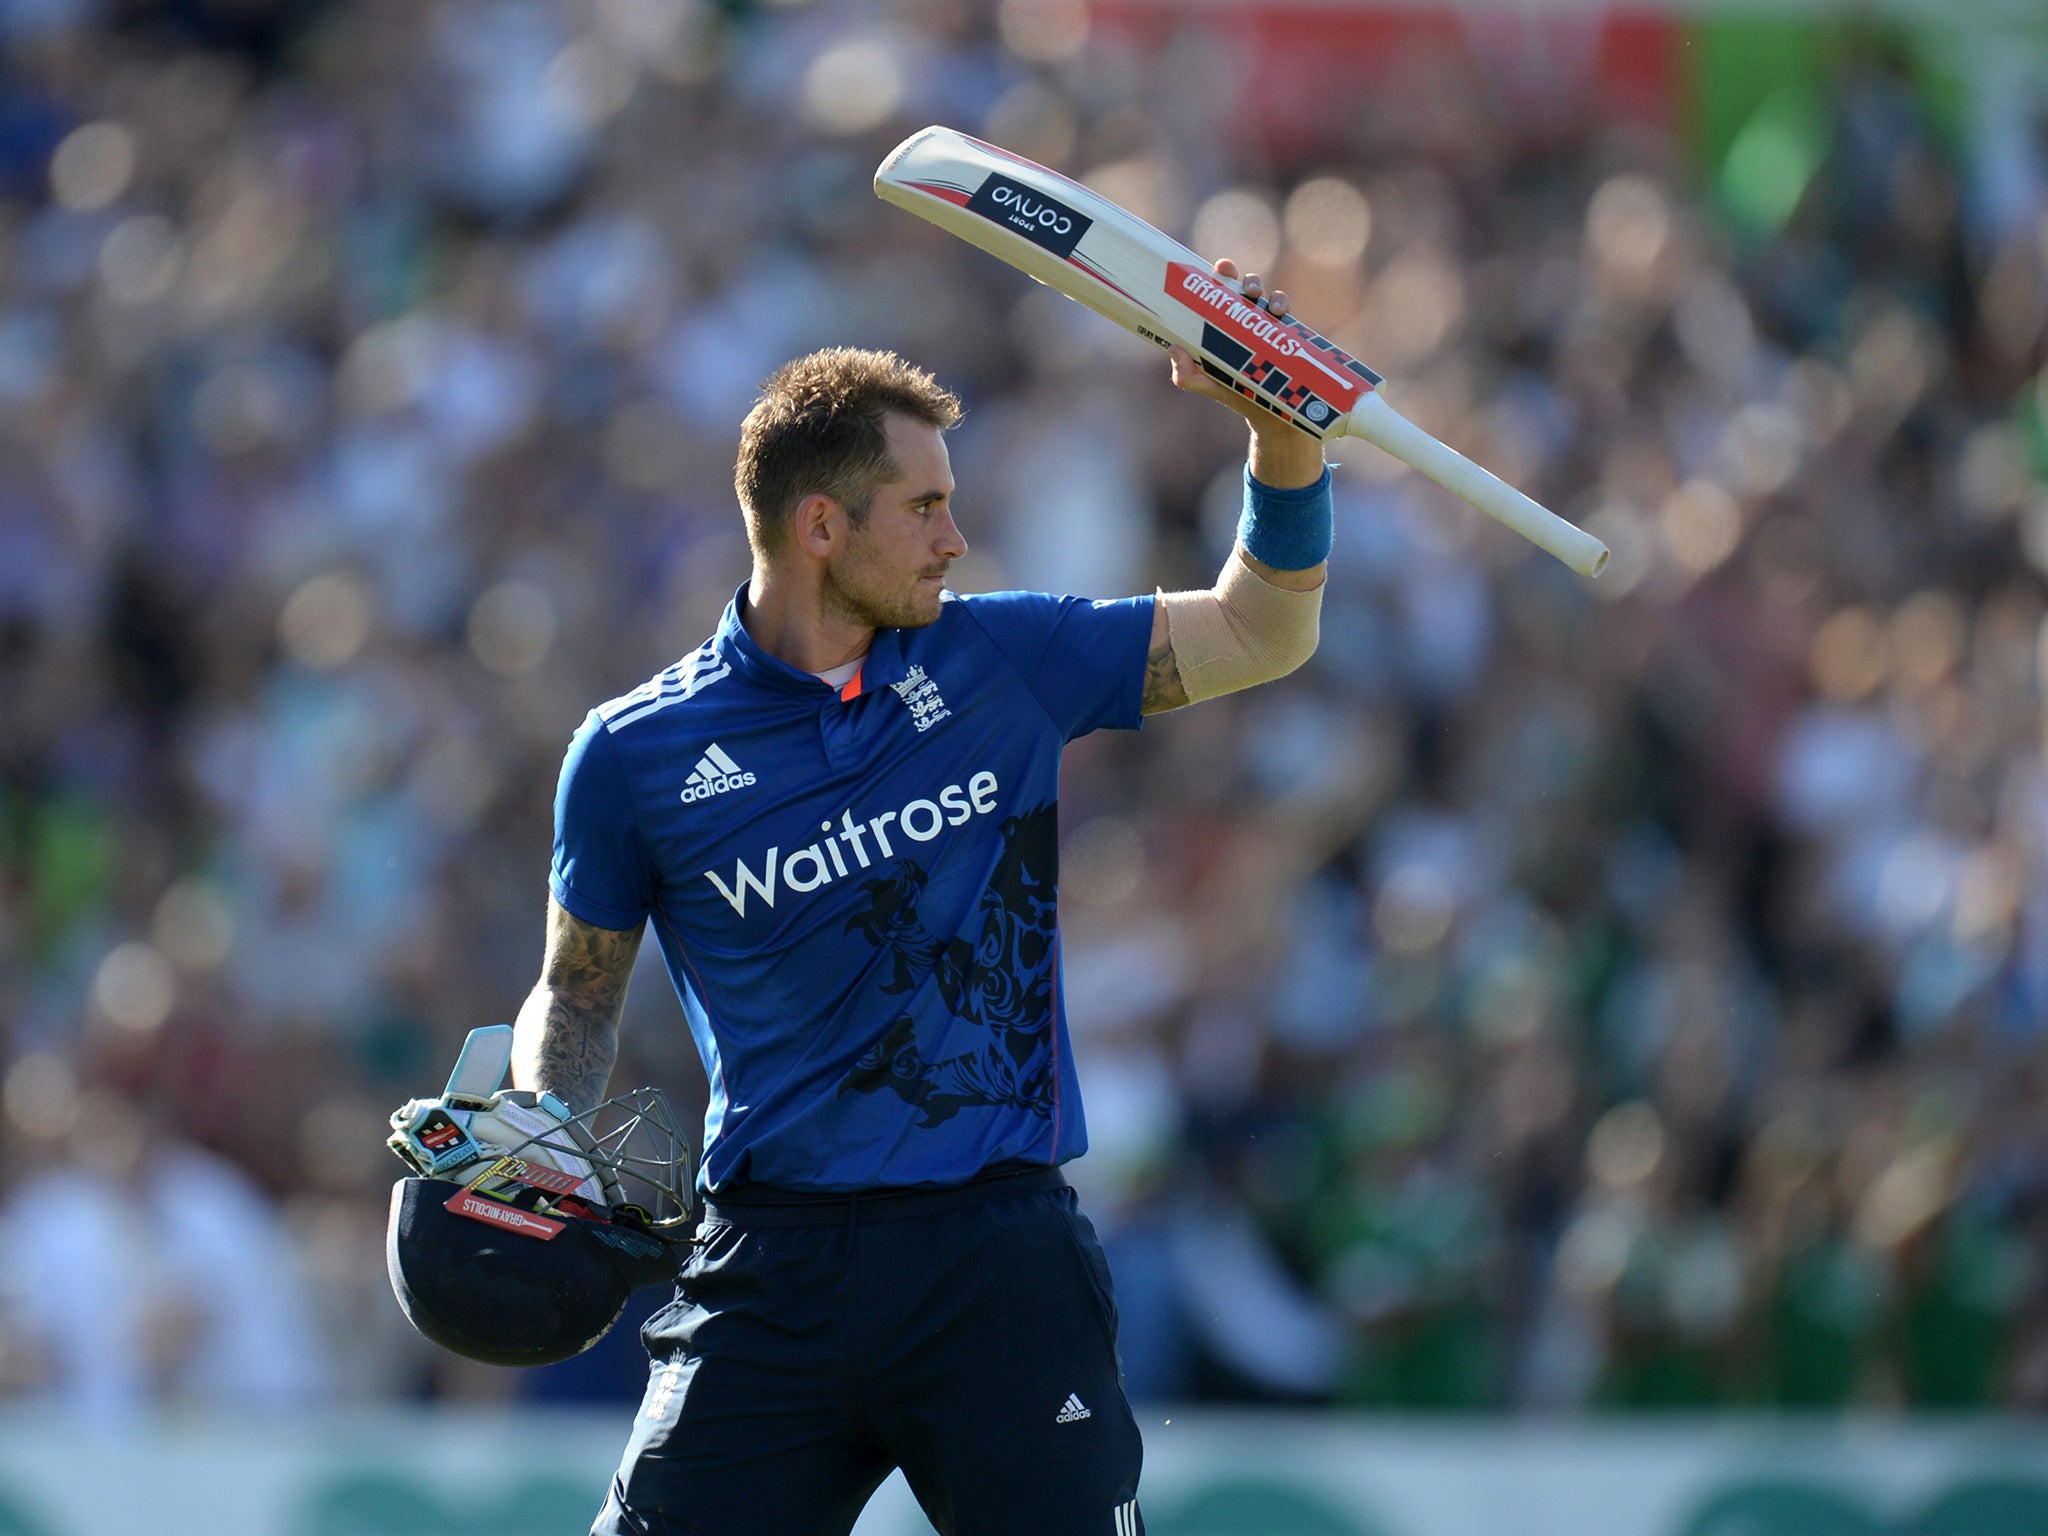 Hales walks off celebrating his record knock for an Englishman